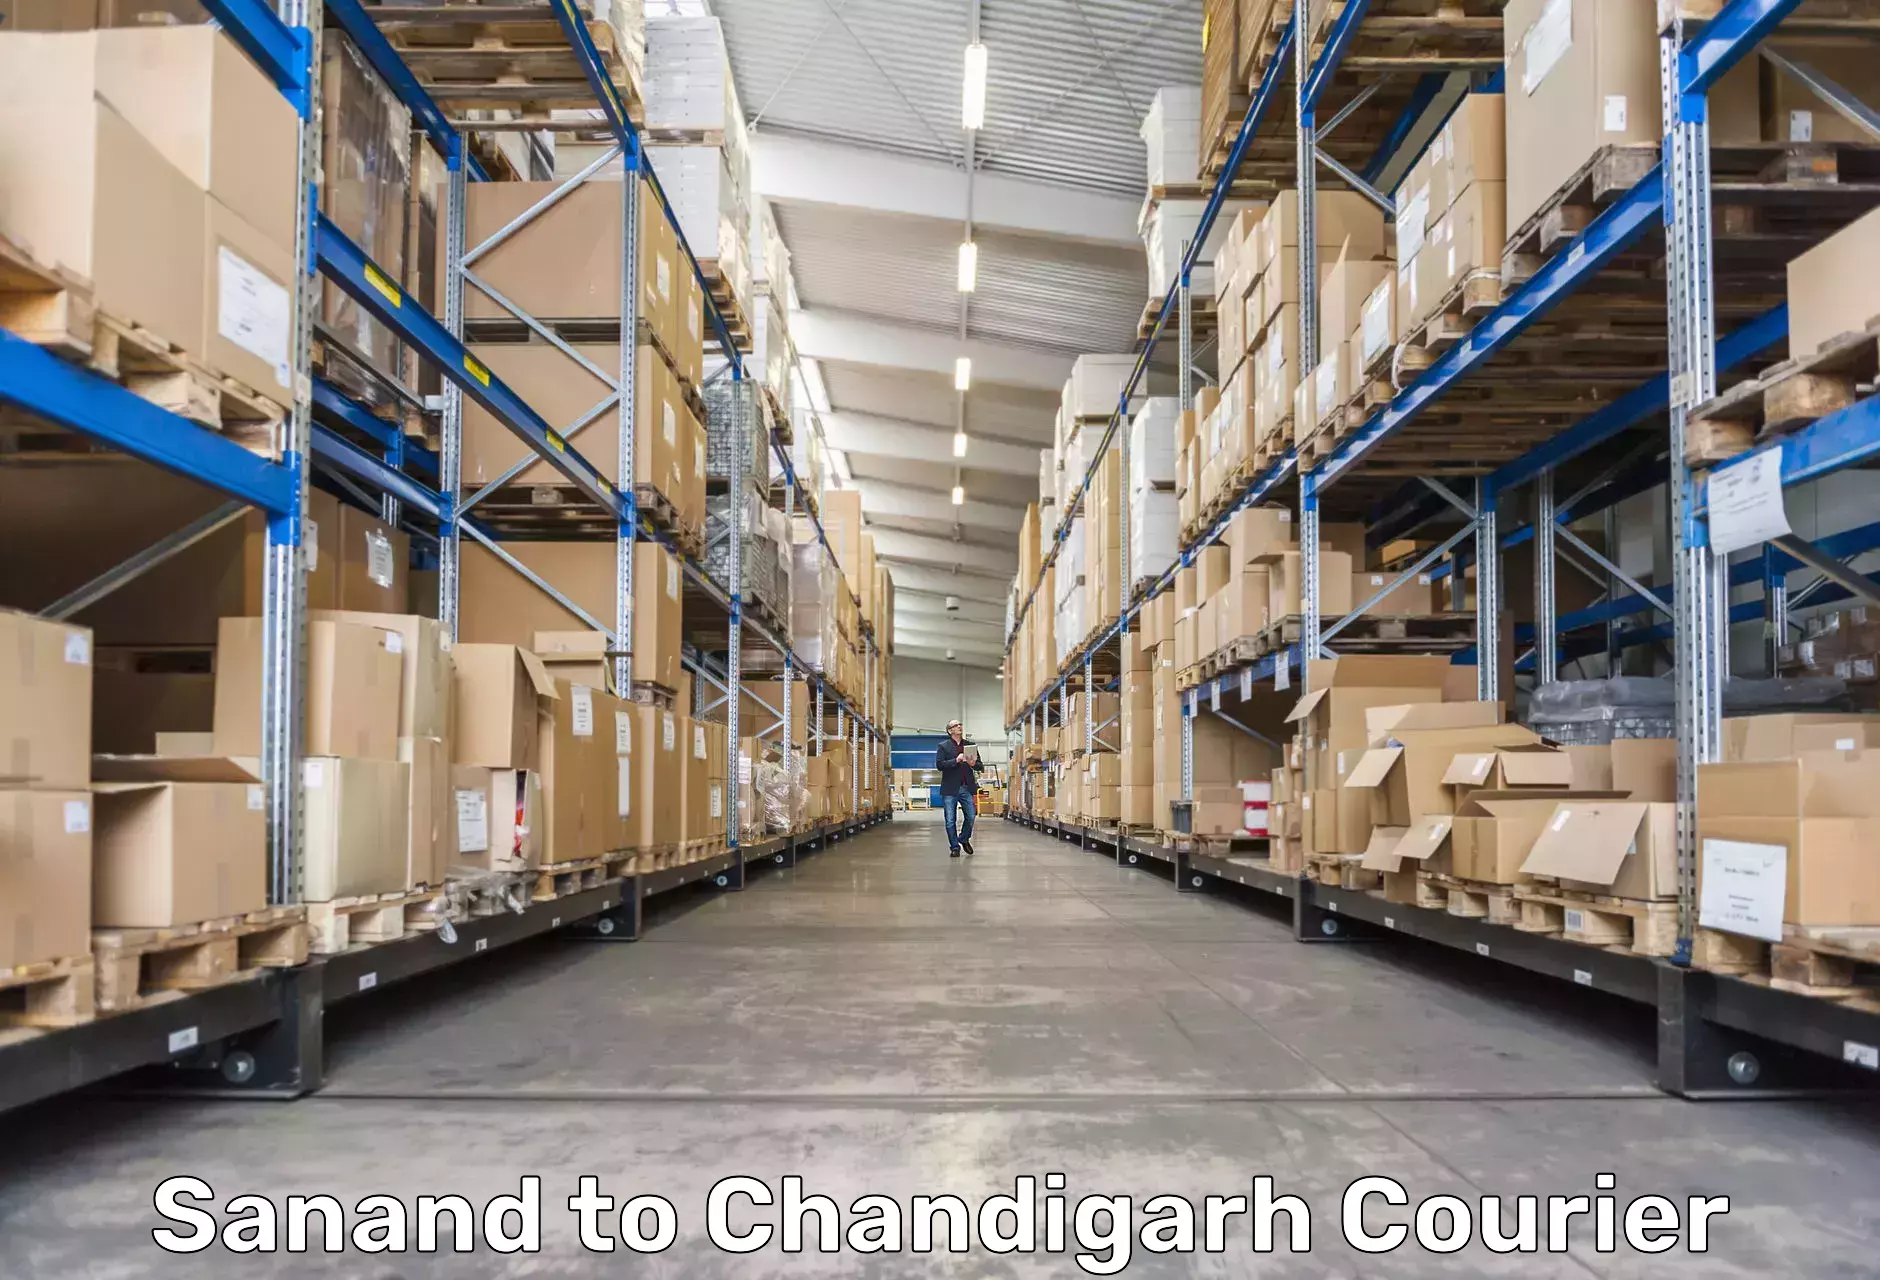 Doorstep delivery service Sanand to Chandigarh